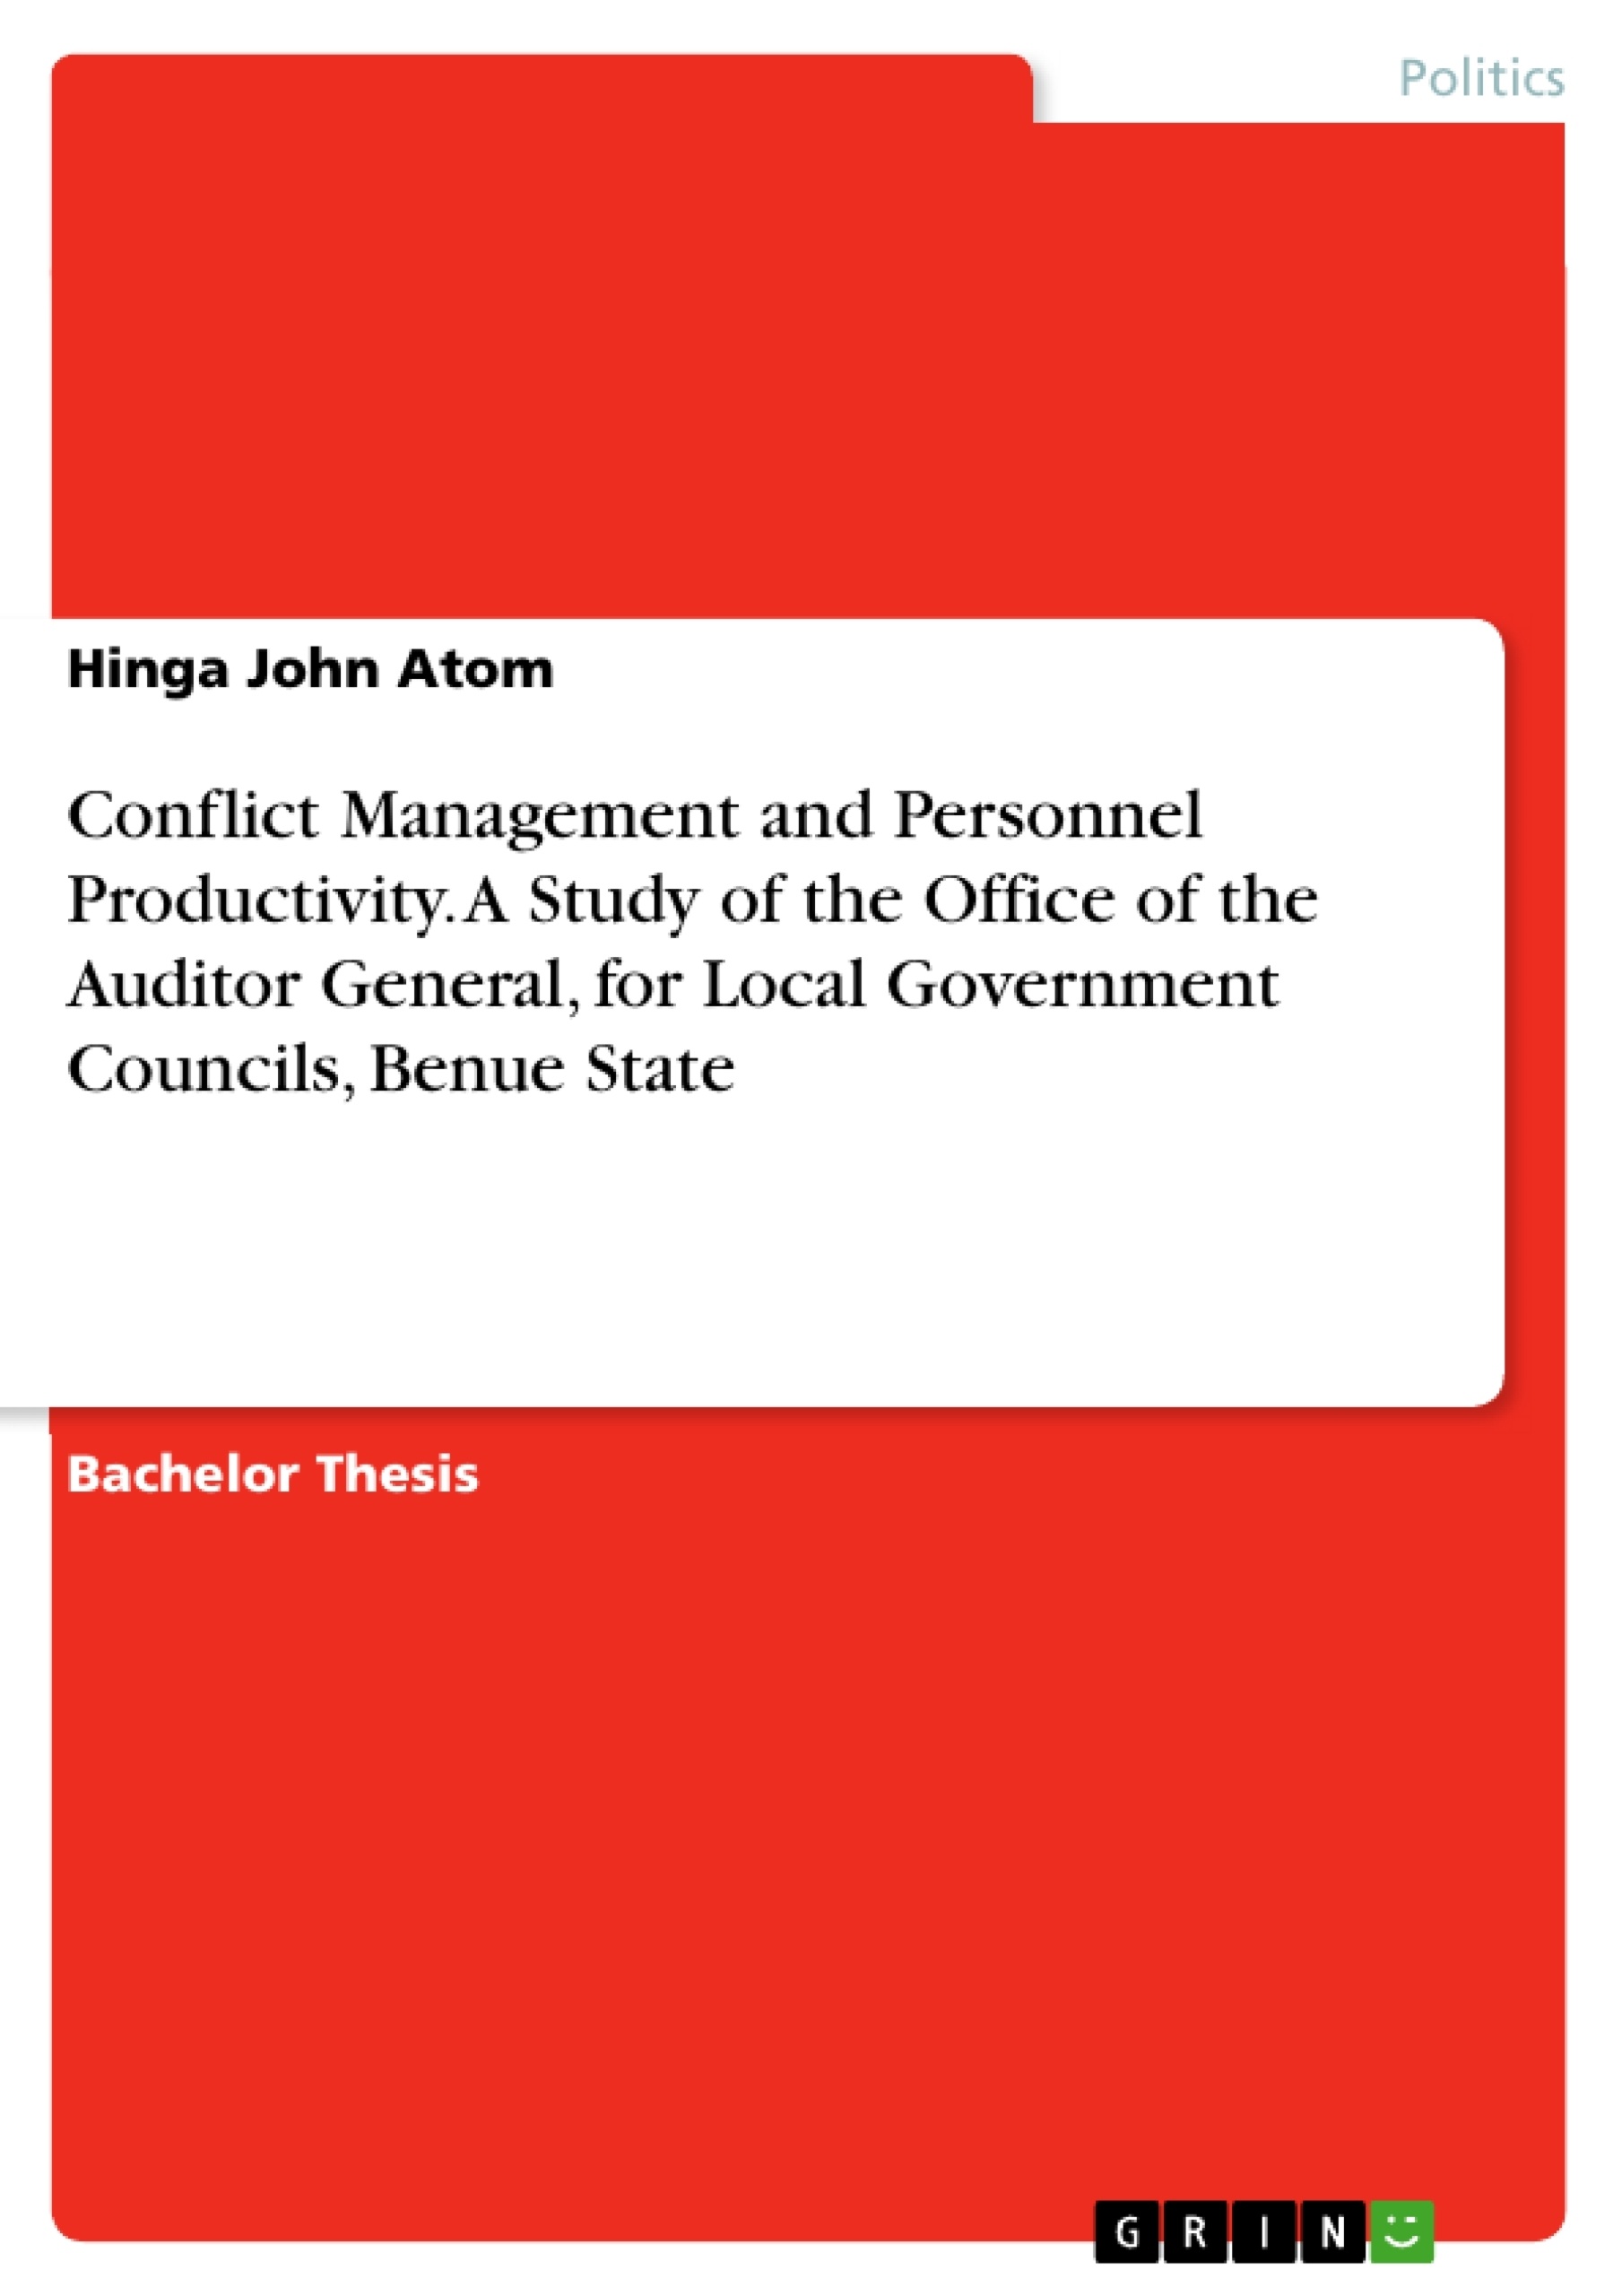 Title: Conflict Management and Personnel Productivity. A Study of the Office of the Auditor General, for Local Government Councils, Benue State